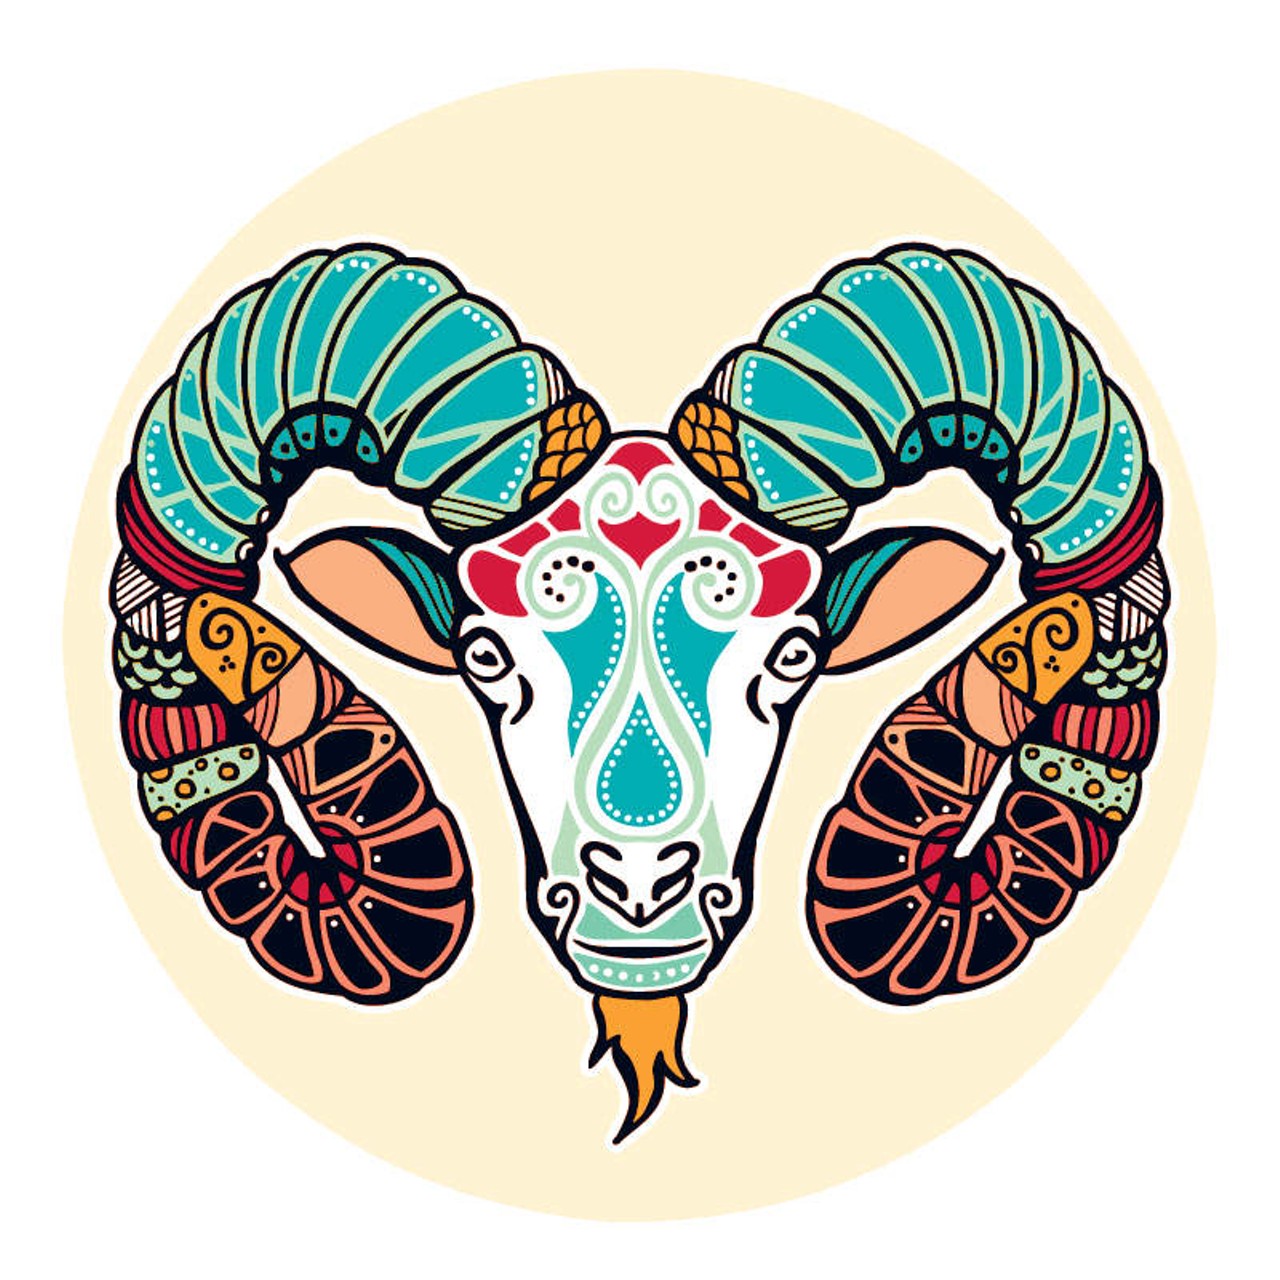 ARIES (March 21- April 20): 
Before you jump down anyone&#146;s throat, make sure you have your facts straight. The tendency to assume way too much is making it hard for you to get what you want out of this. Whoever&#146;s driving you nuts might as well be 4 years old. The next time you get into a tiff with them it will help you to remember that it took them forever for them to get this messed up. Stop needing to be right about everything. If you can detach enough to stop judging them and listen to their story with an open heart you will be able to communicate well enough to fix what isn&#146;t working here.